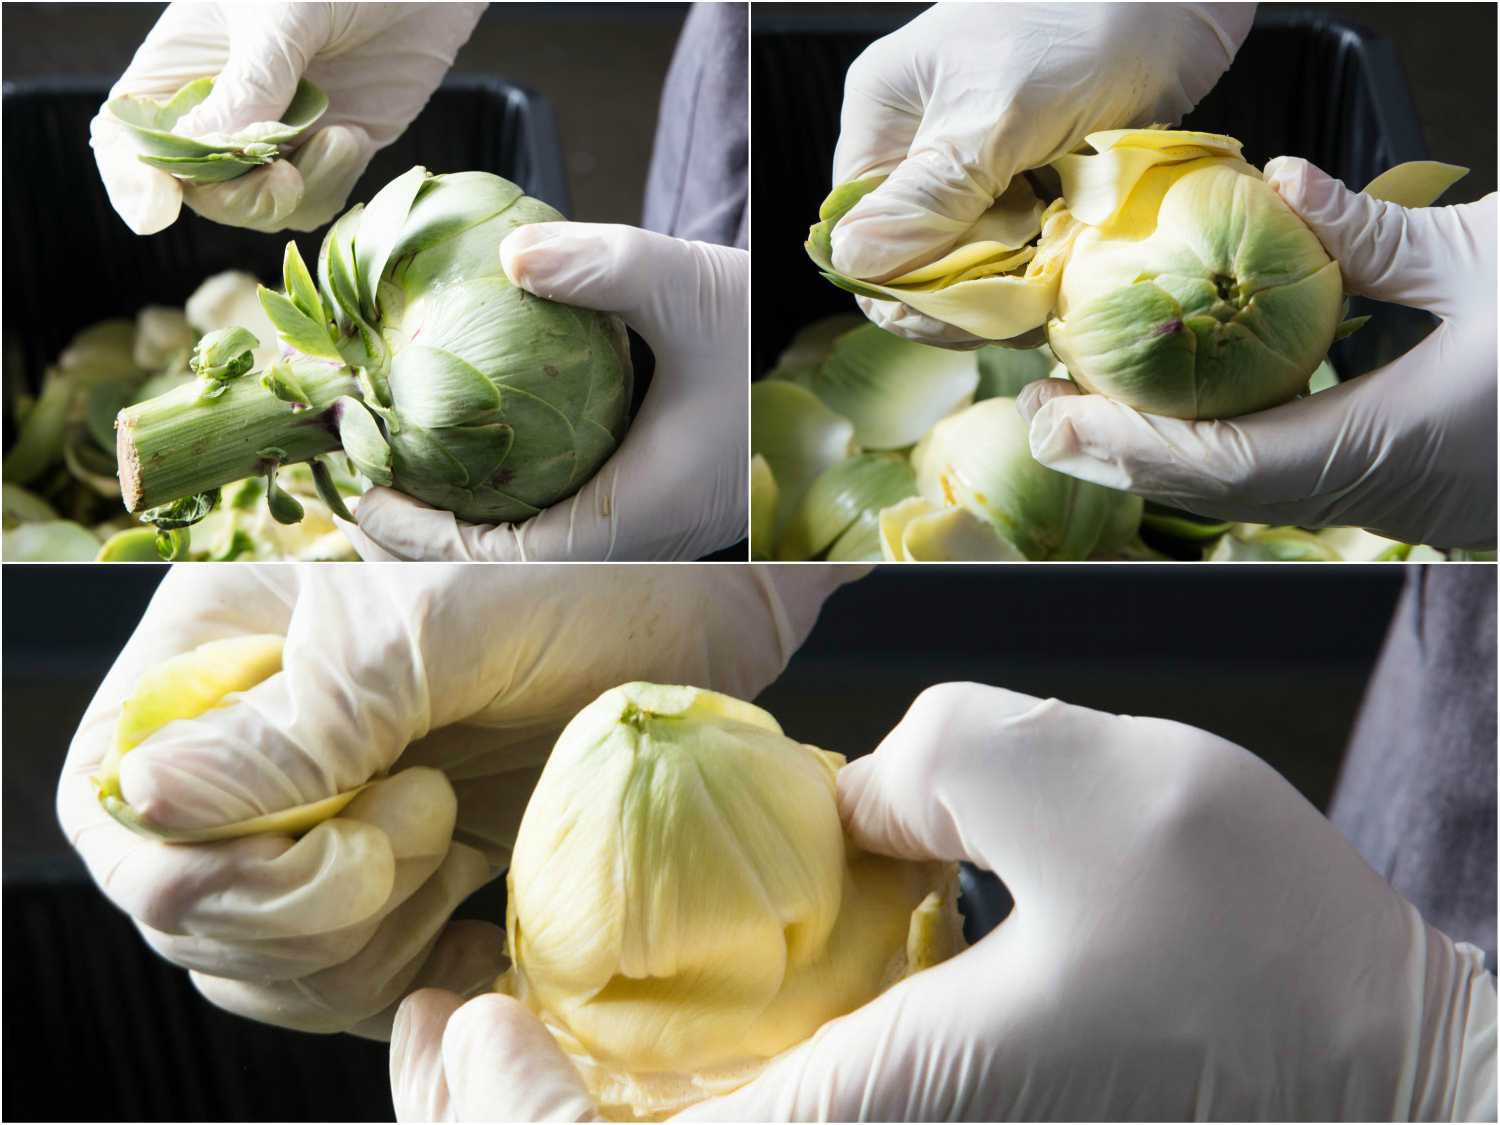 Collage of removing outer leaves (bracts) from artichoke, beginning with tough, green outermost leaves and finishing with softer, yellow leaves inside.